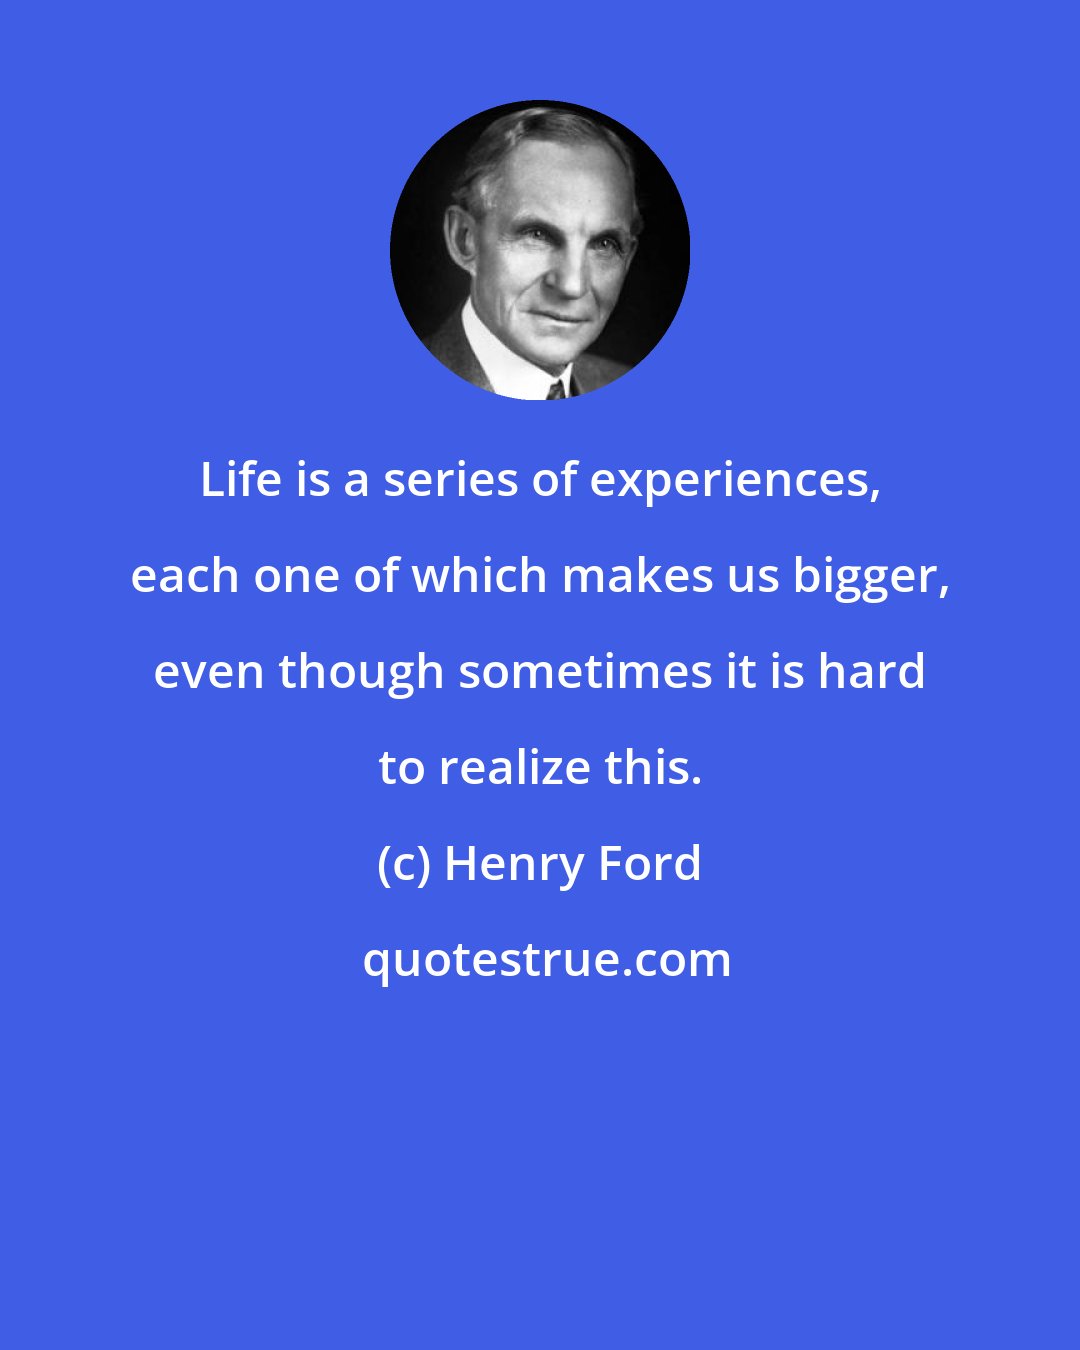 Henry Ford: Life is a series of experiences, each one of which makes us bigger, even though sometimes it is hard to realize this.